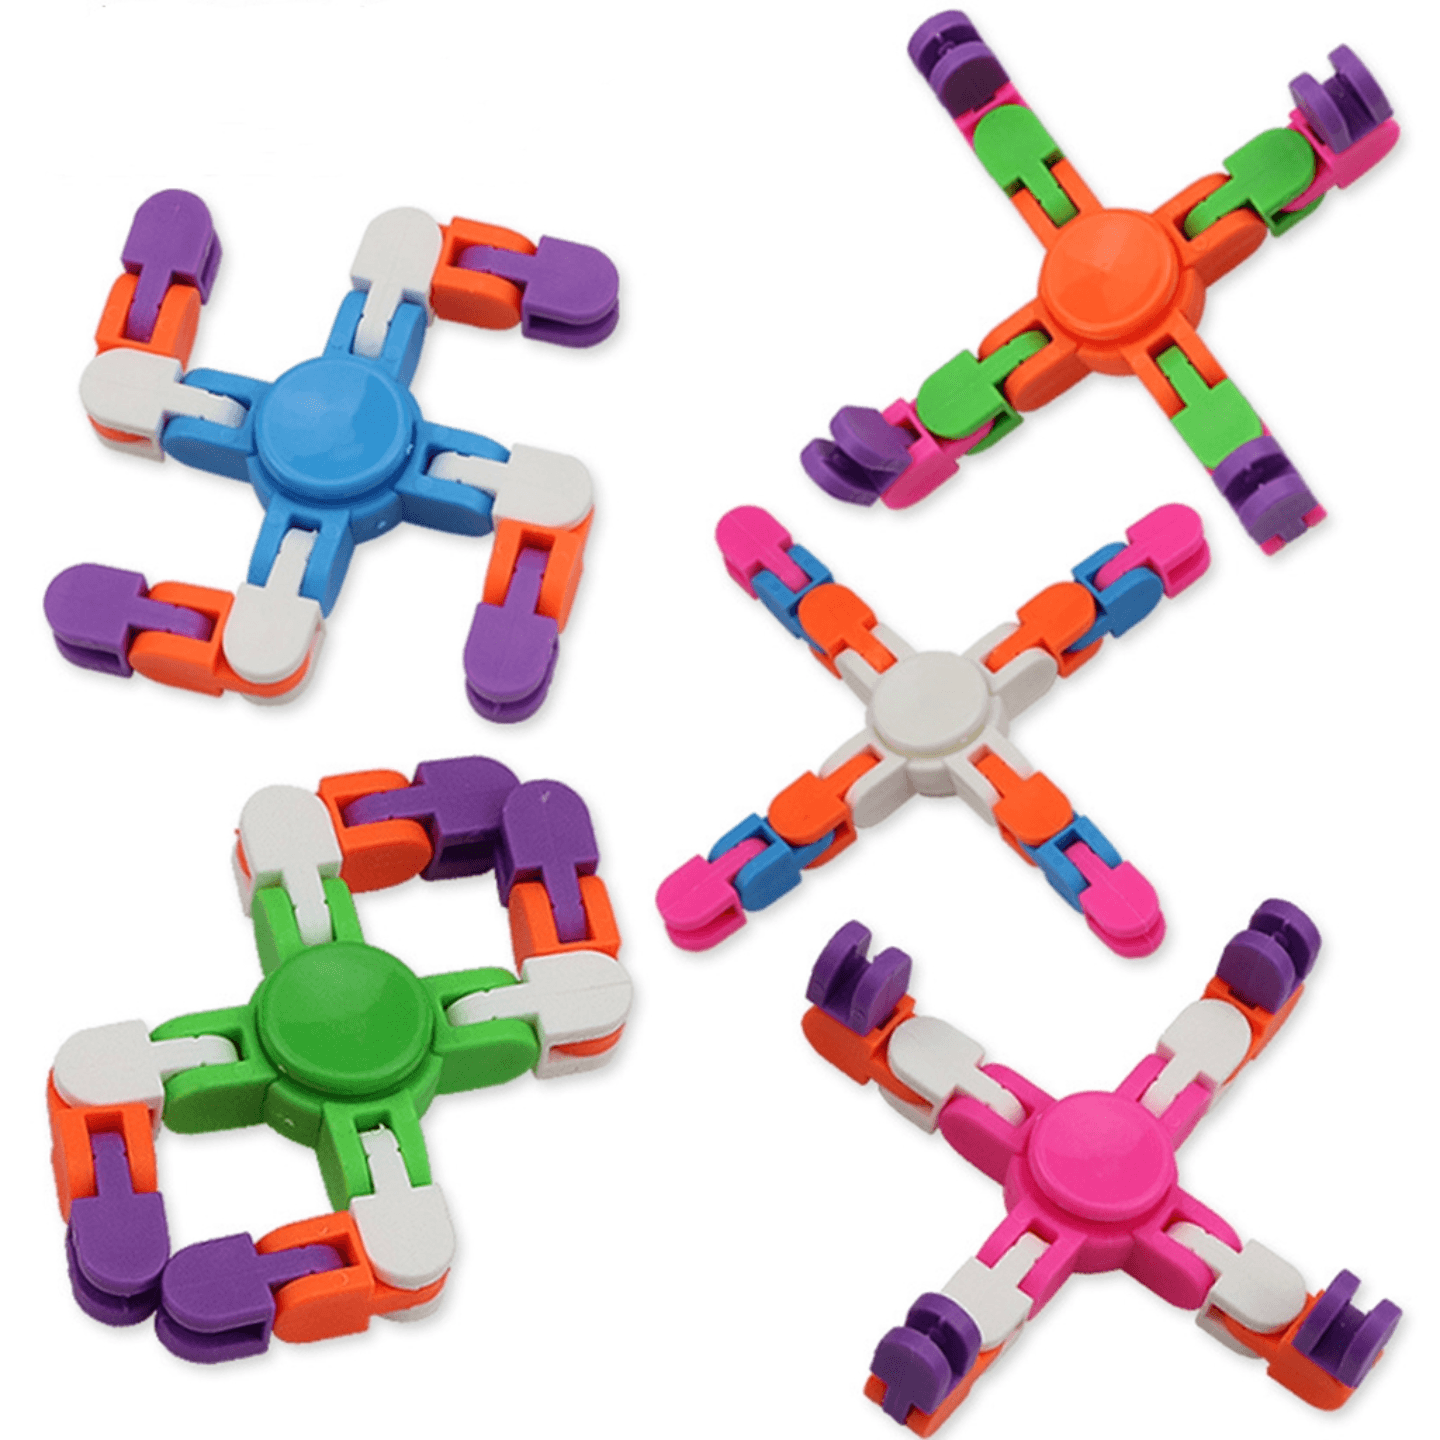 Creative Wacky Fidget Spinning Toy with Flexible Bendable Shapes  Random Colour